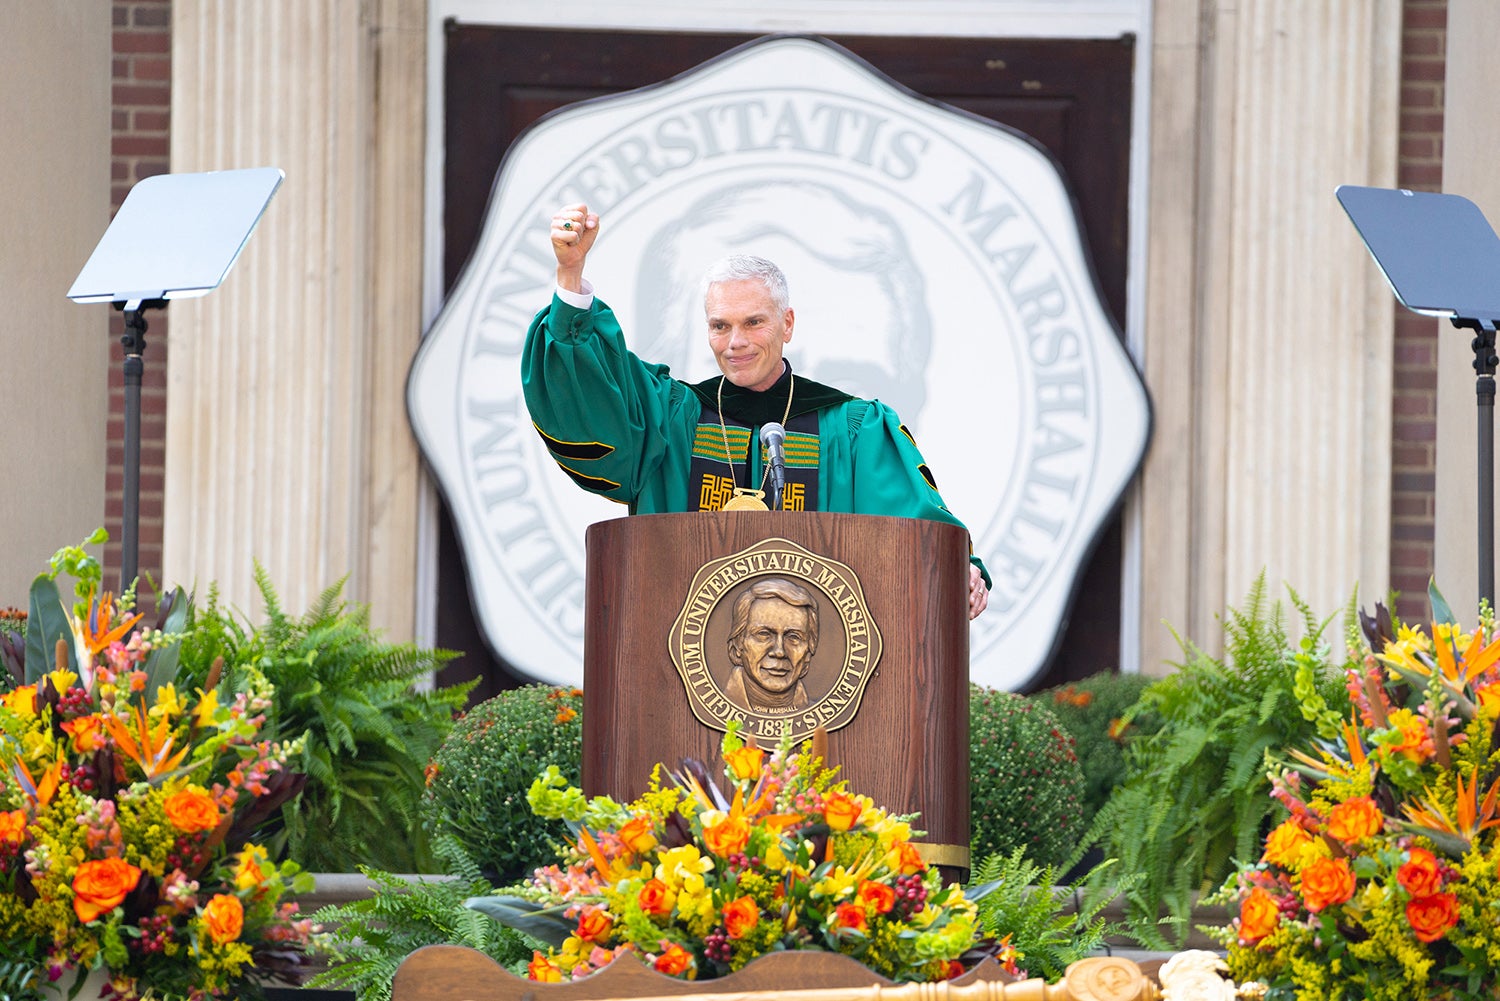 Brad D. Smith installed as the 38th President of Marshall University